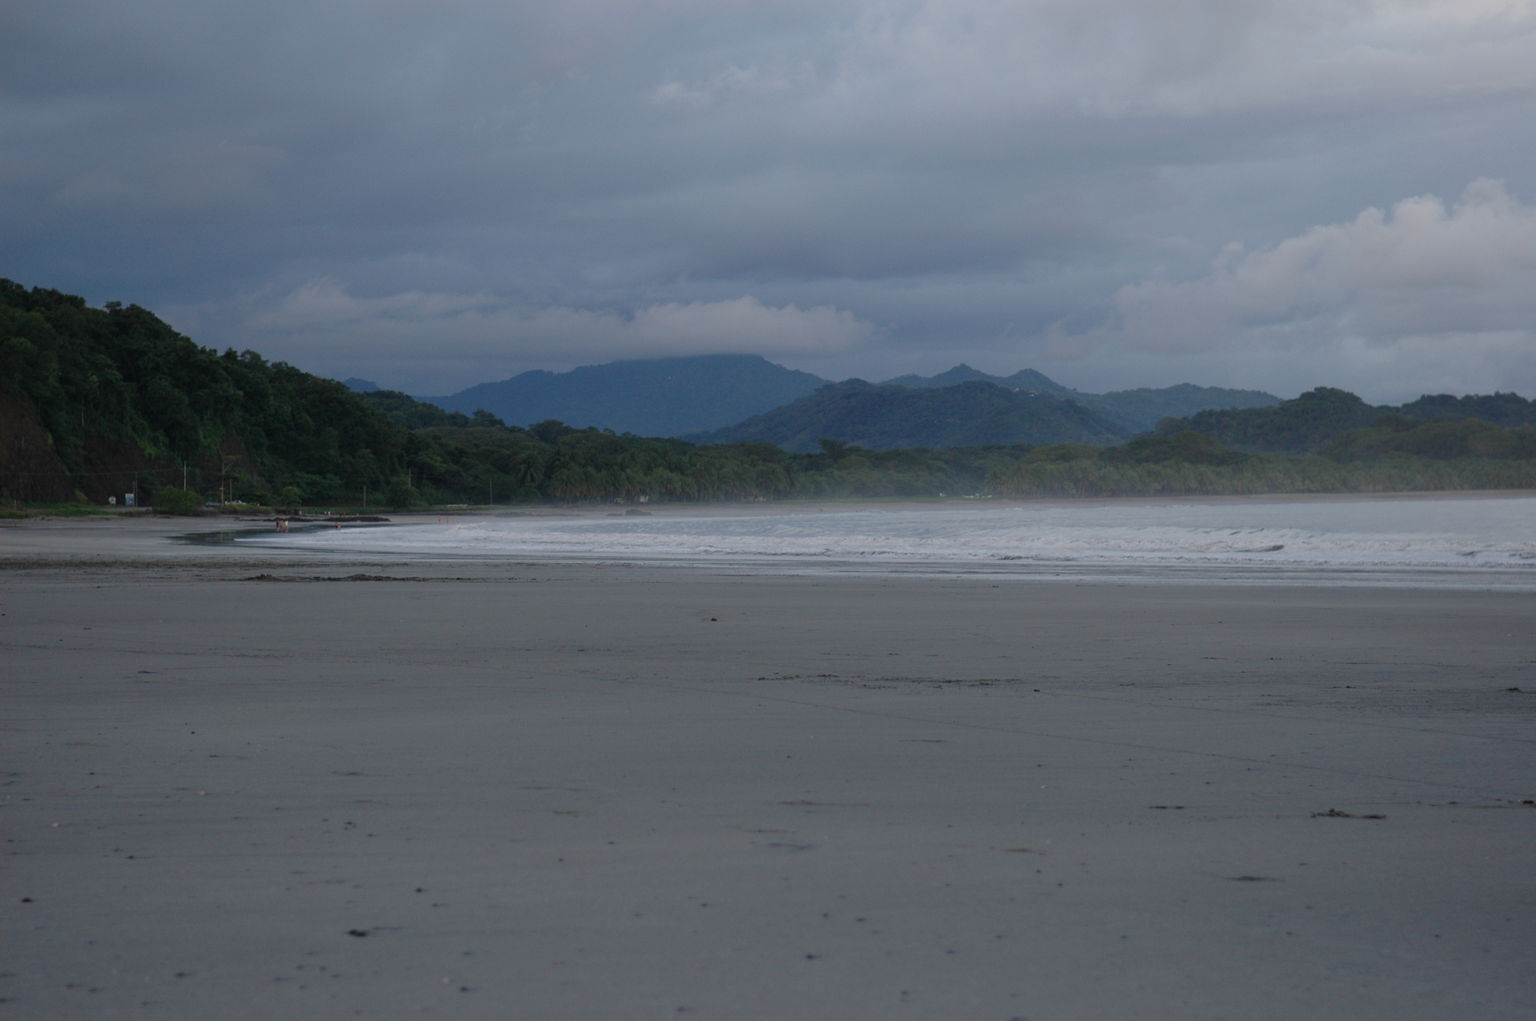 Alleged candidate for "the most picturesque beach in Costa Rica," Playa Carillo